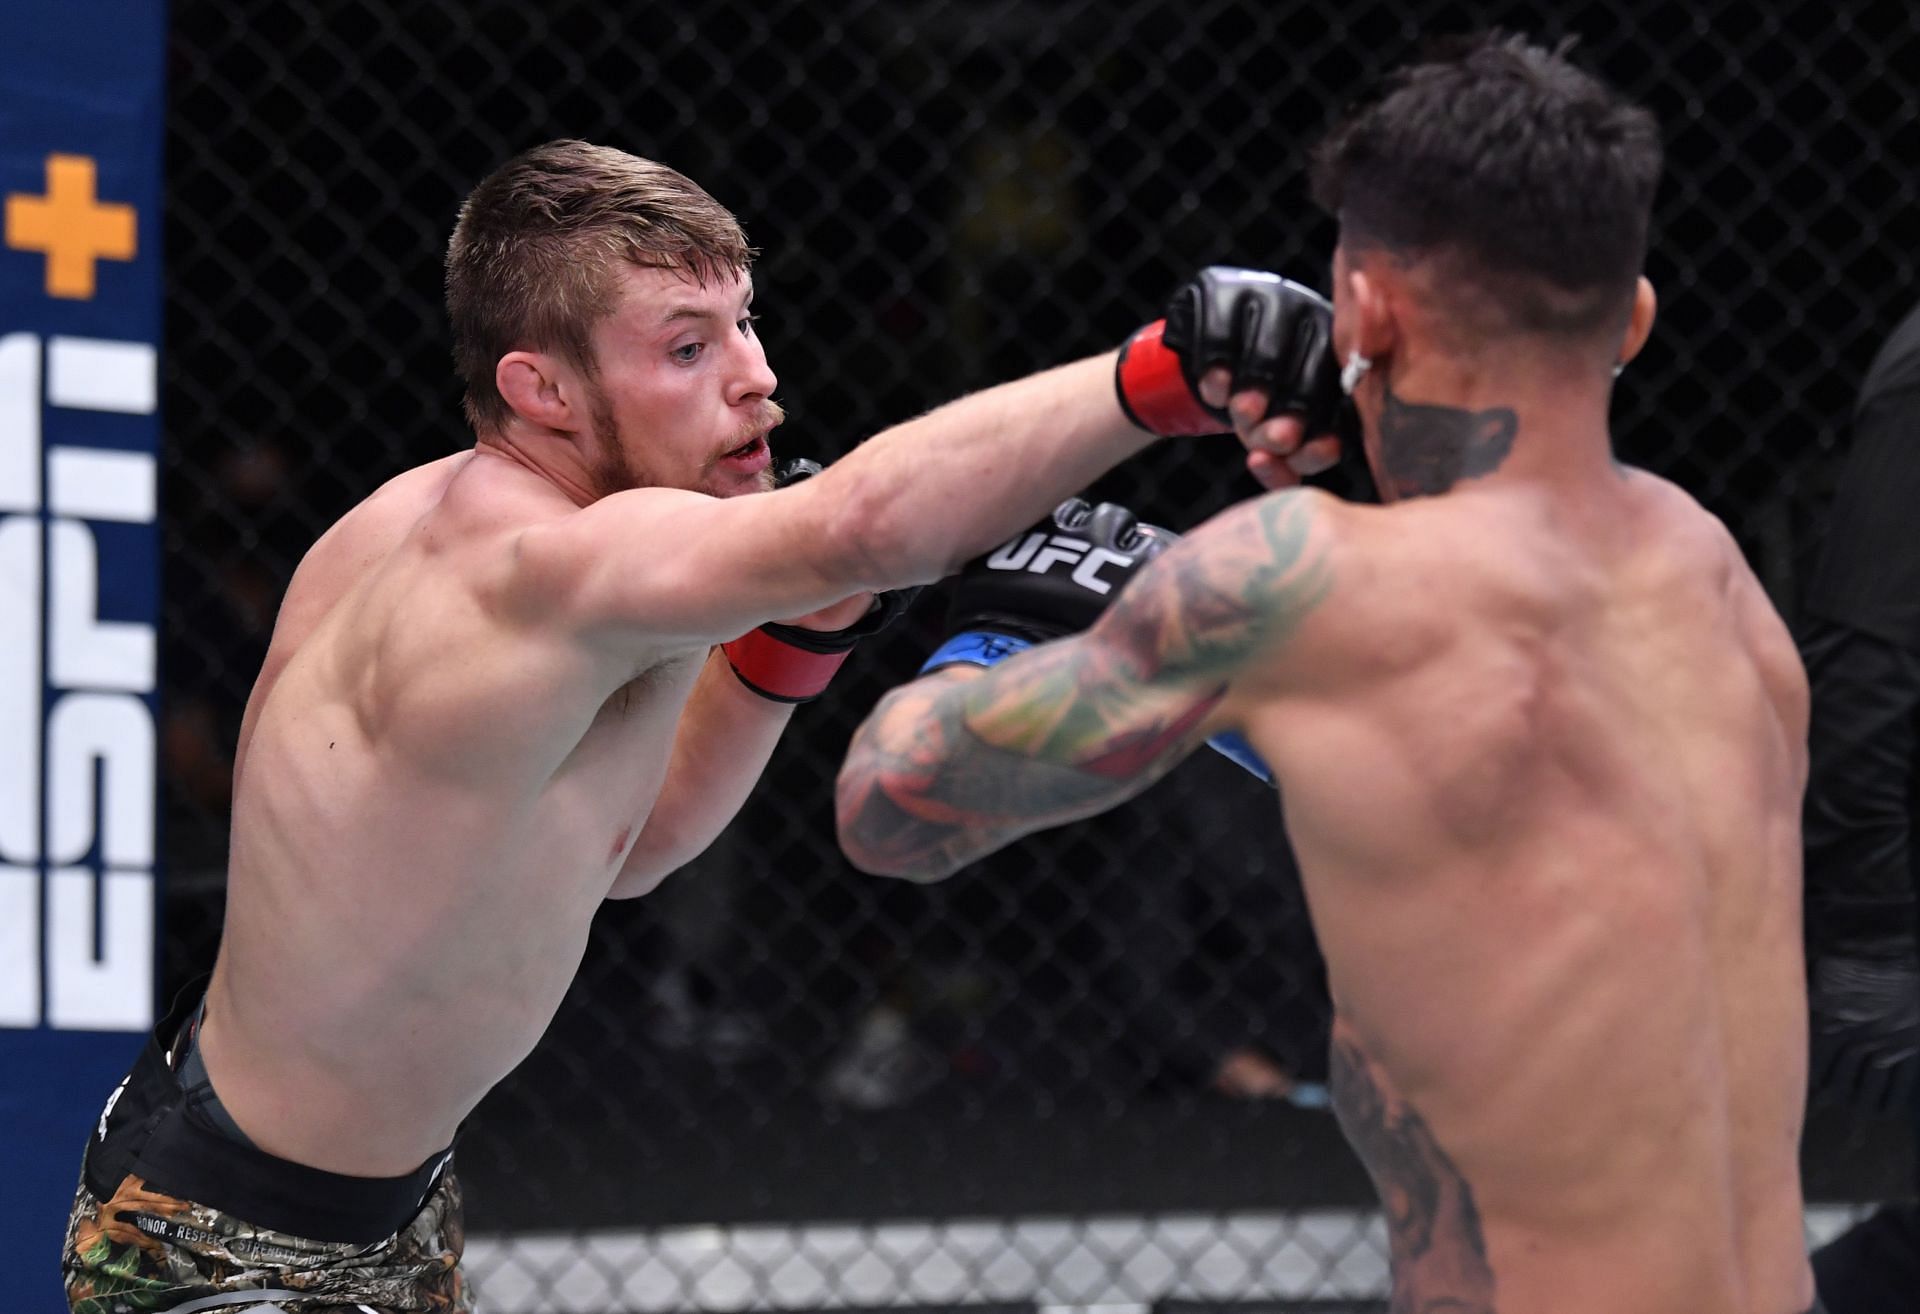 Bryce Mitchell is one of the best prospects in the featherweight division